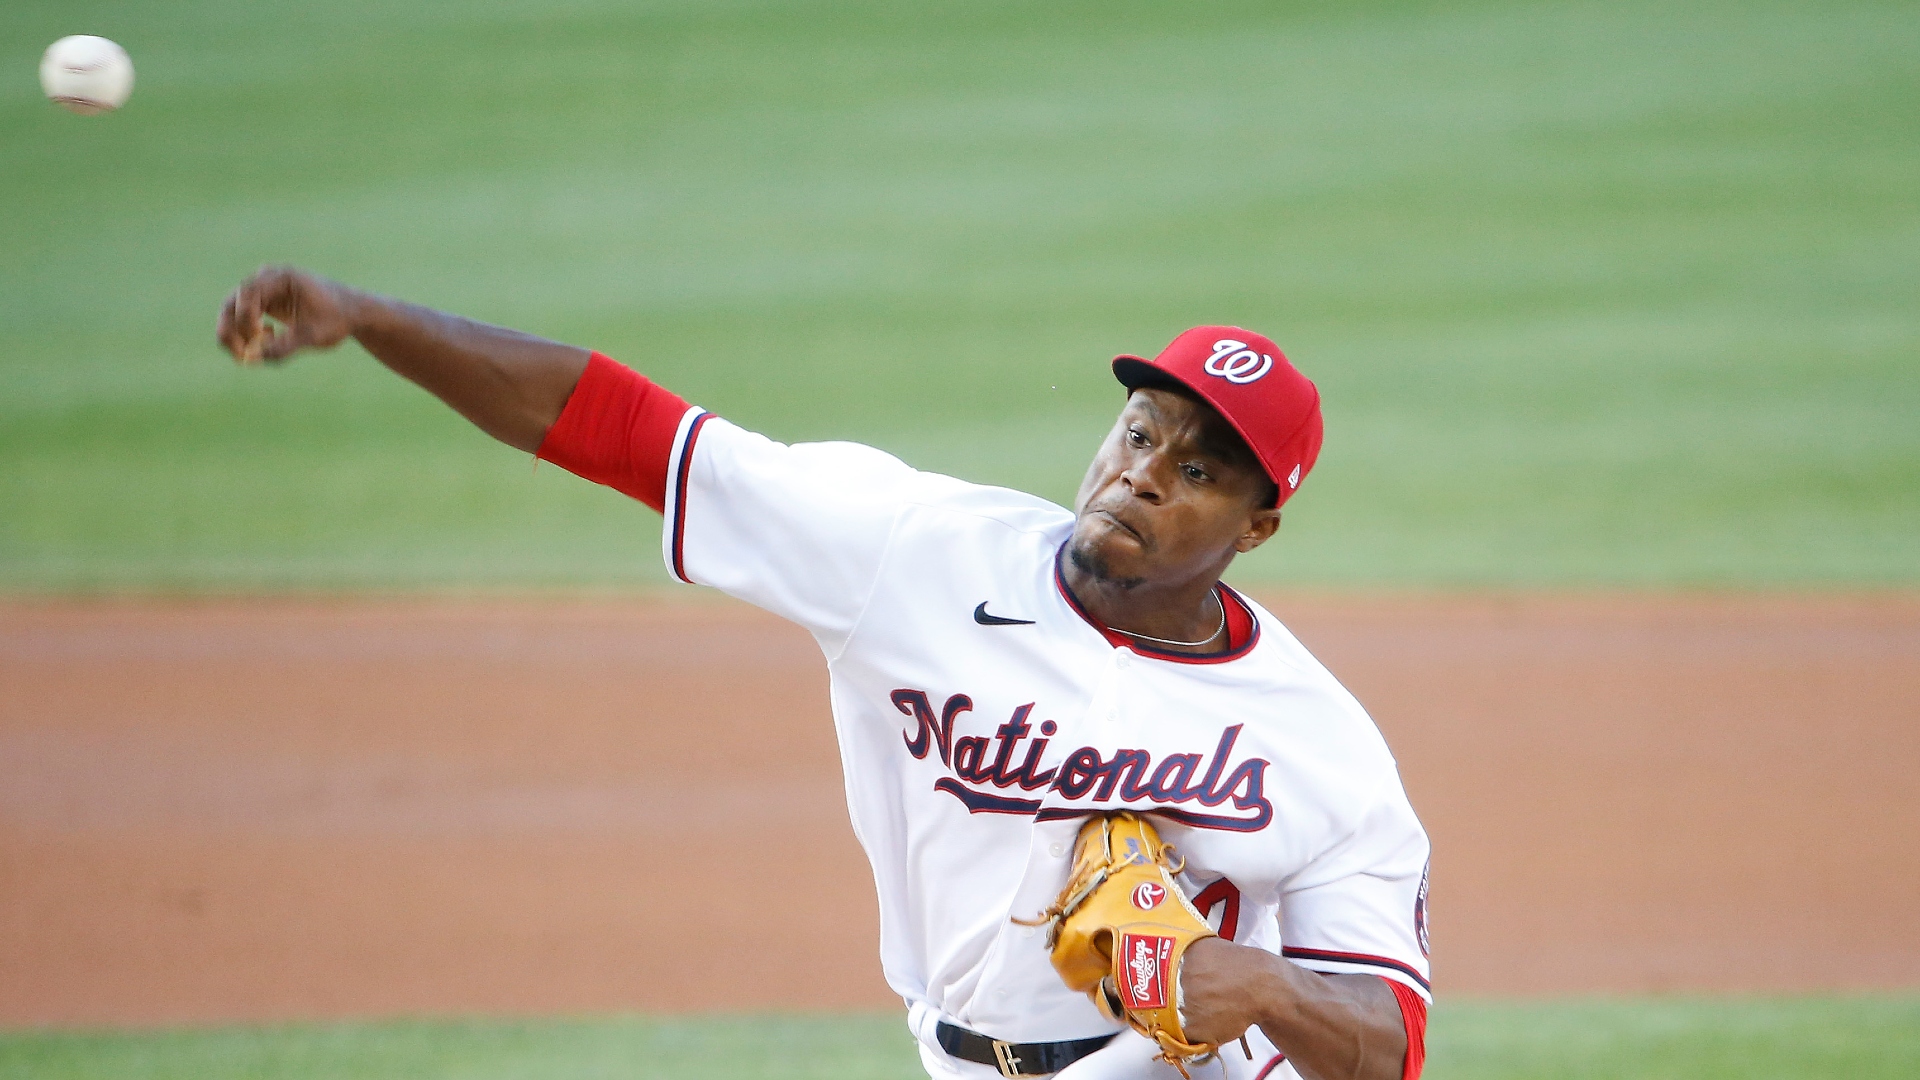 Josiah Gray throws a pitch during his Nationals debut